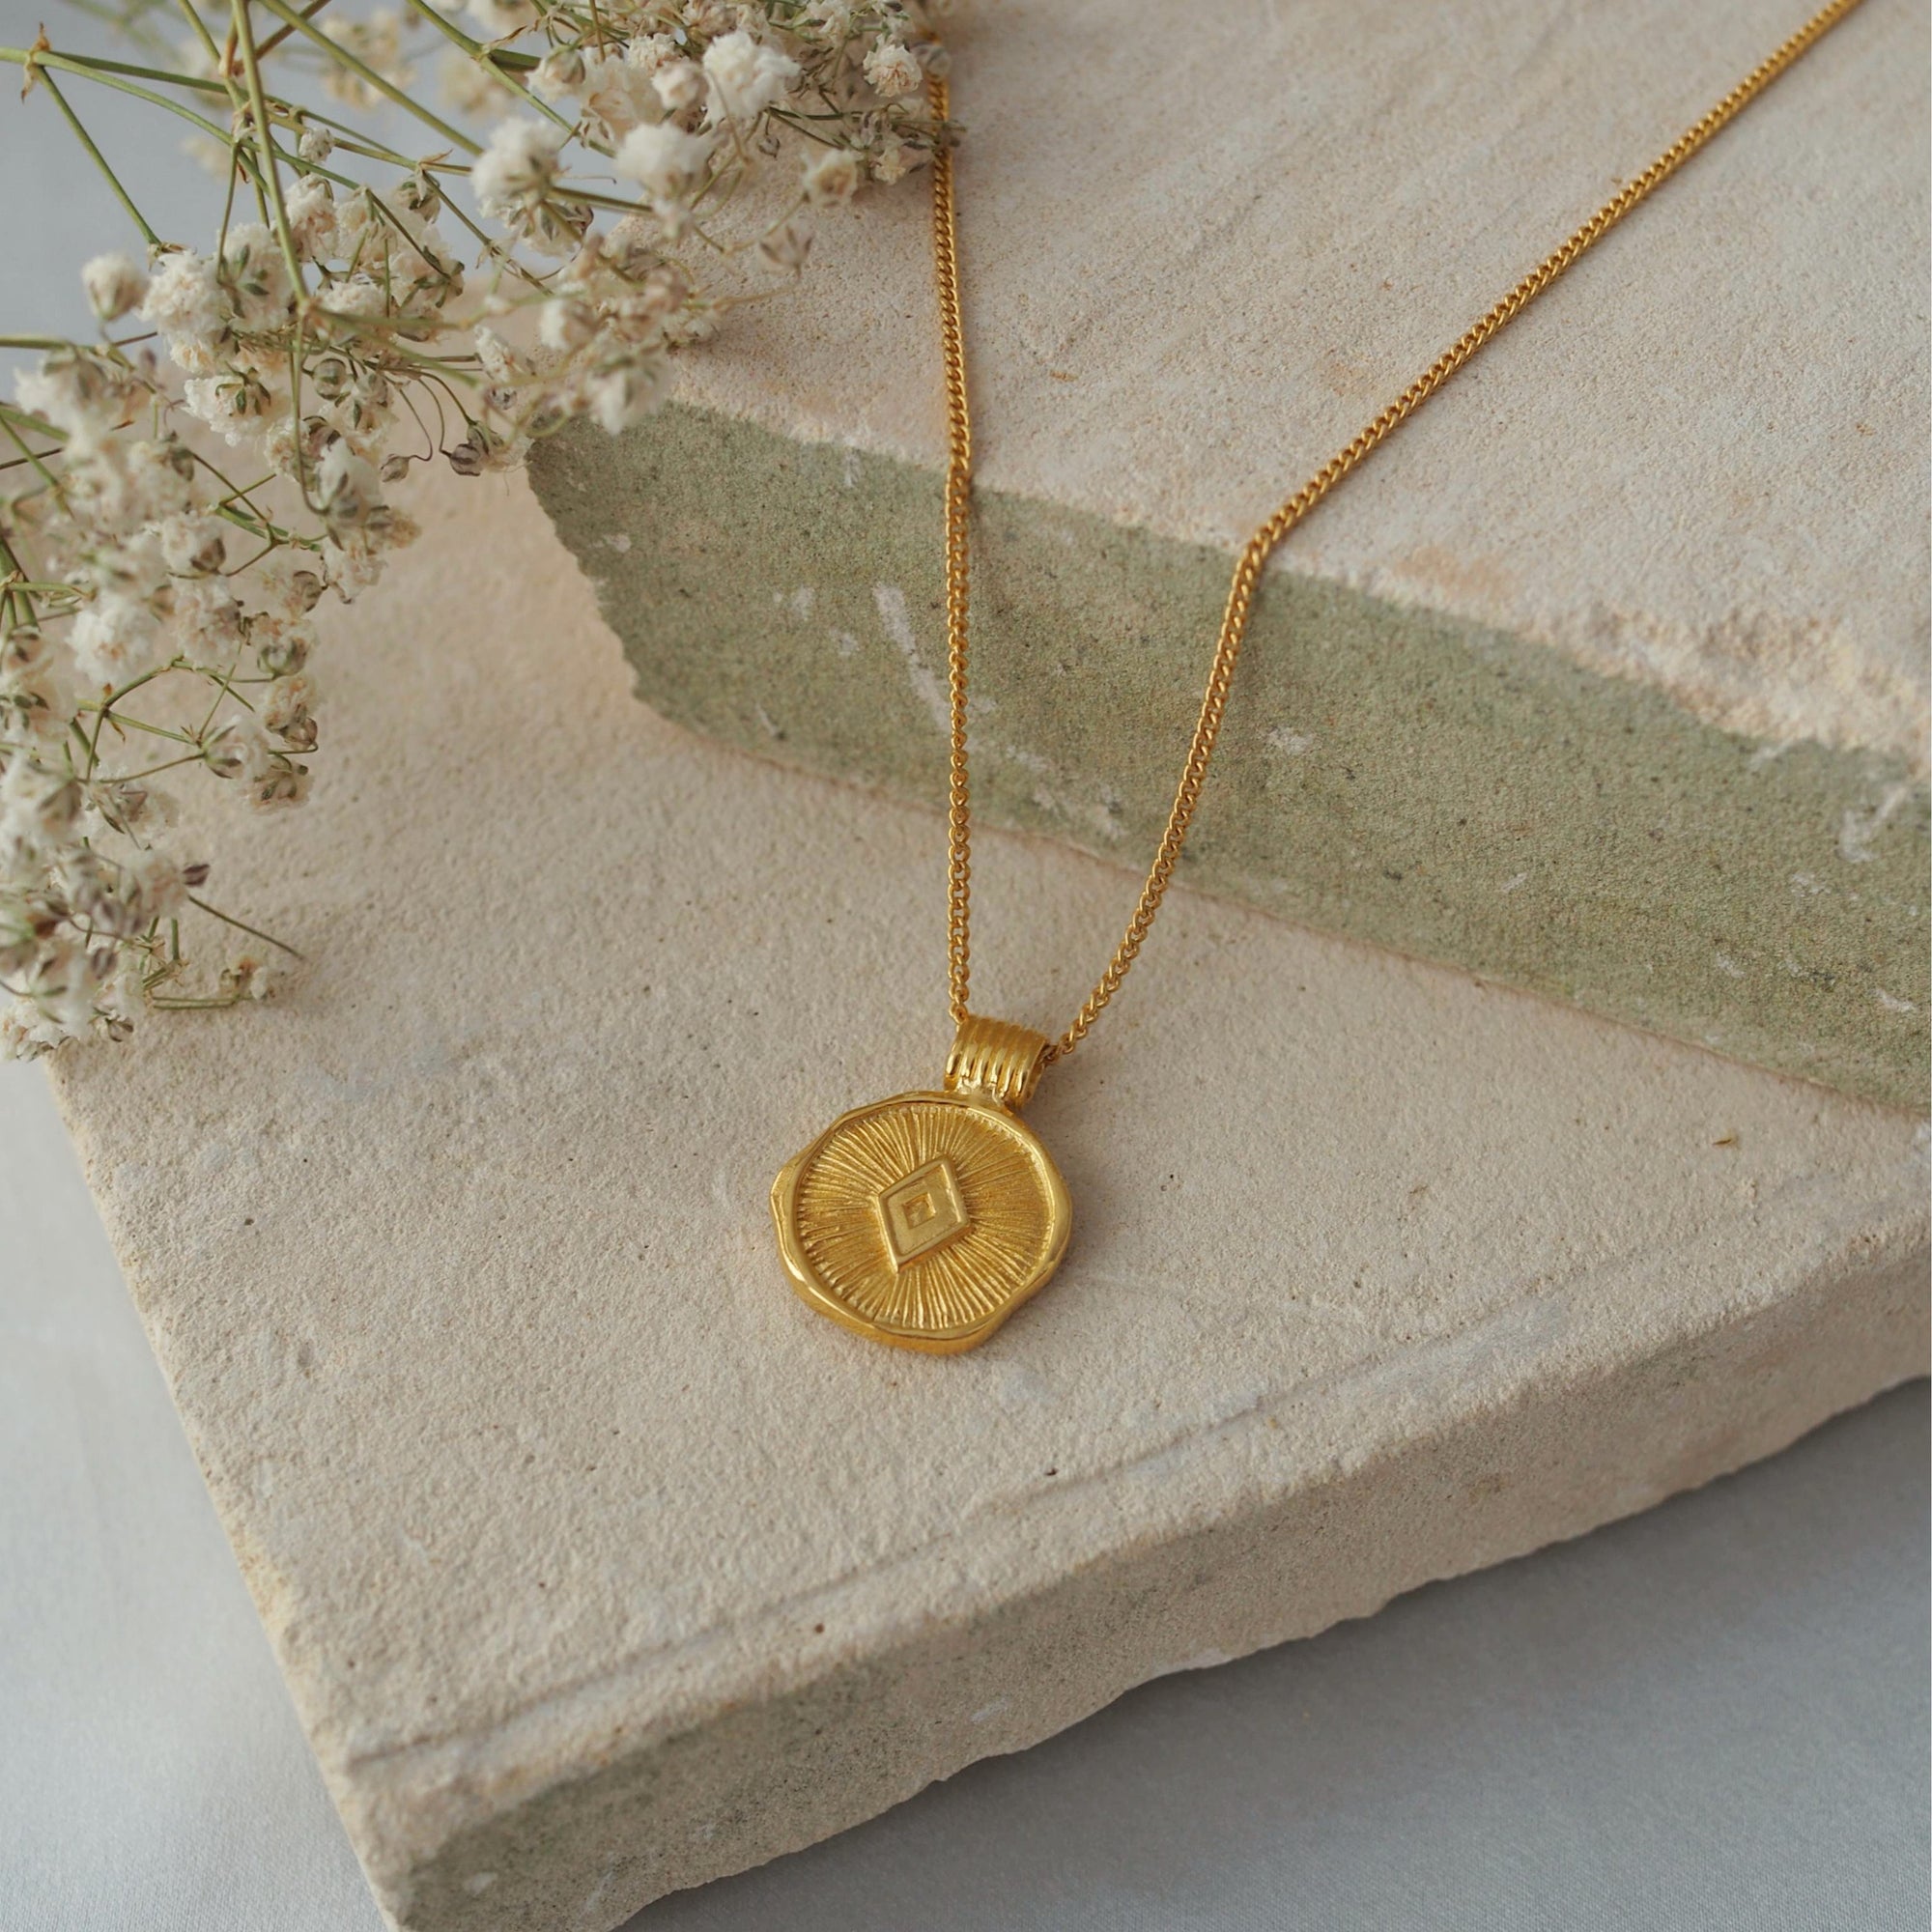 Health Necklace (Reversible) - Gold recycled sterling silver